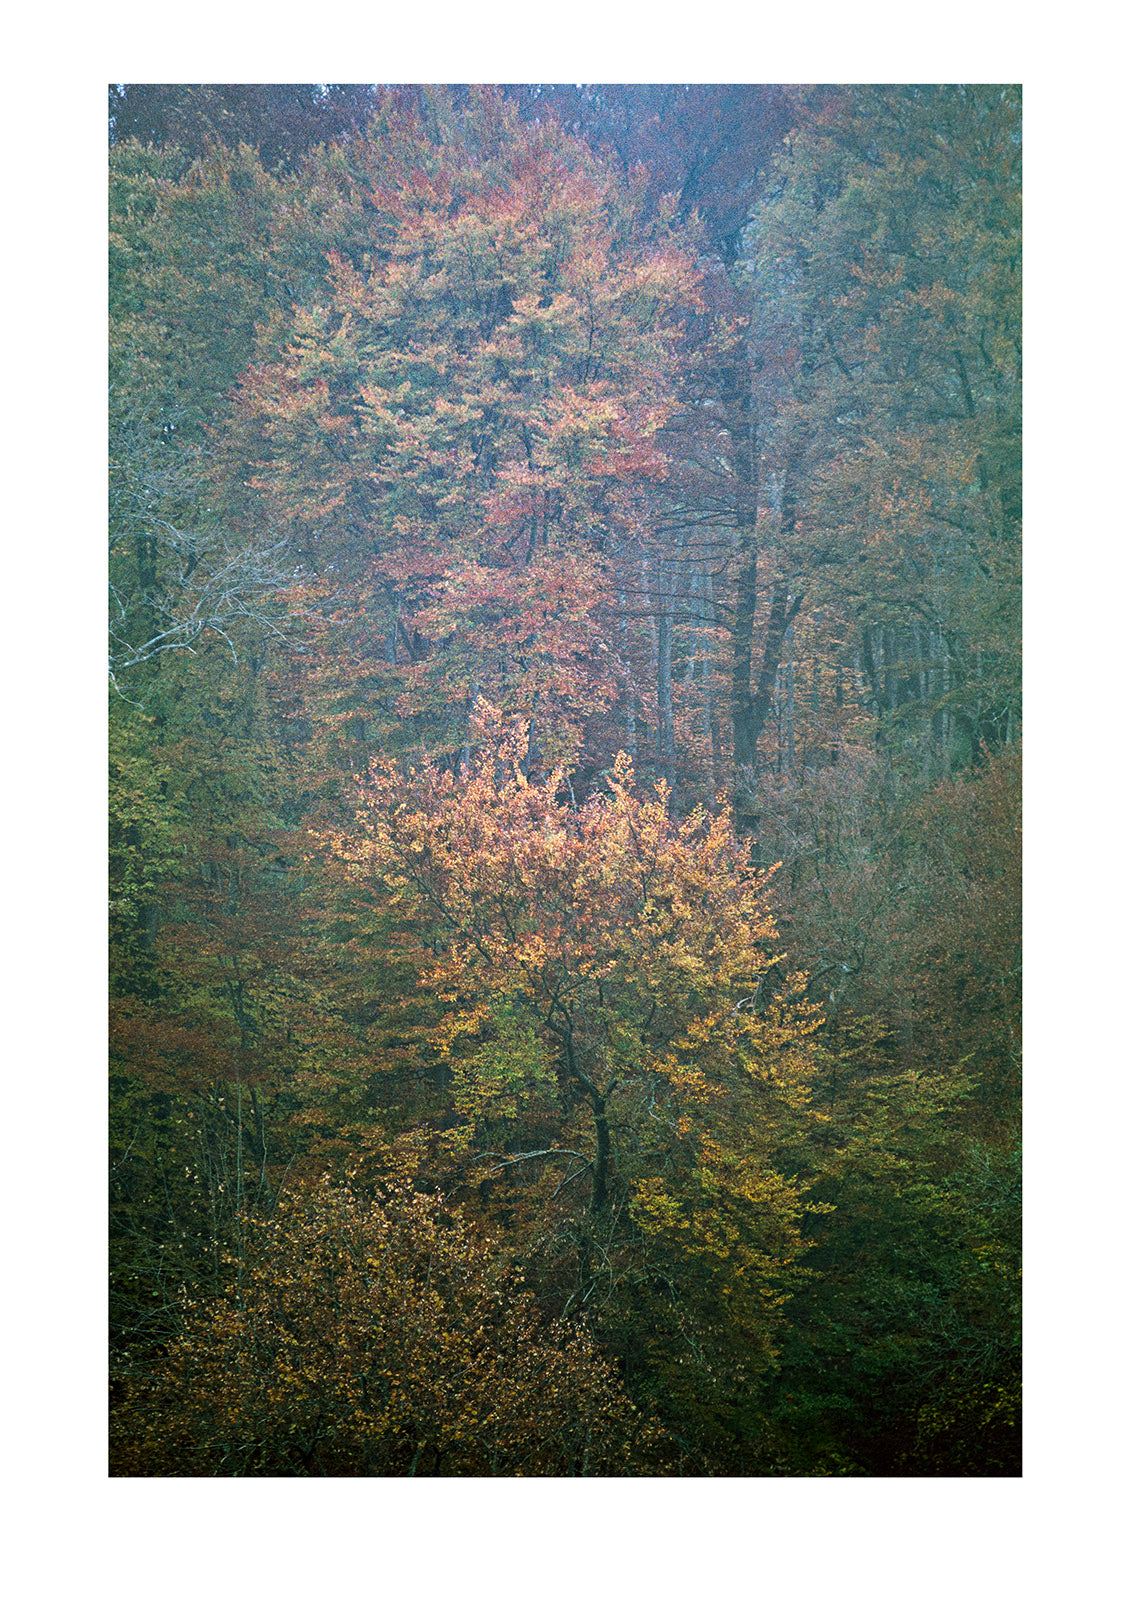 A fog-shrouded deciduous forest in early autumn. Swabian Alb, Baden-Wurttemberg, Germany.